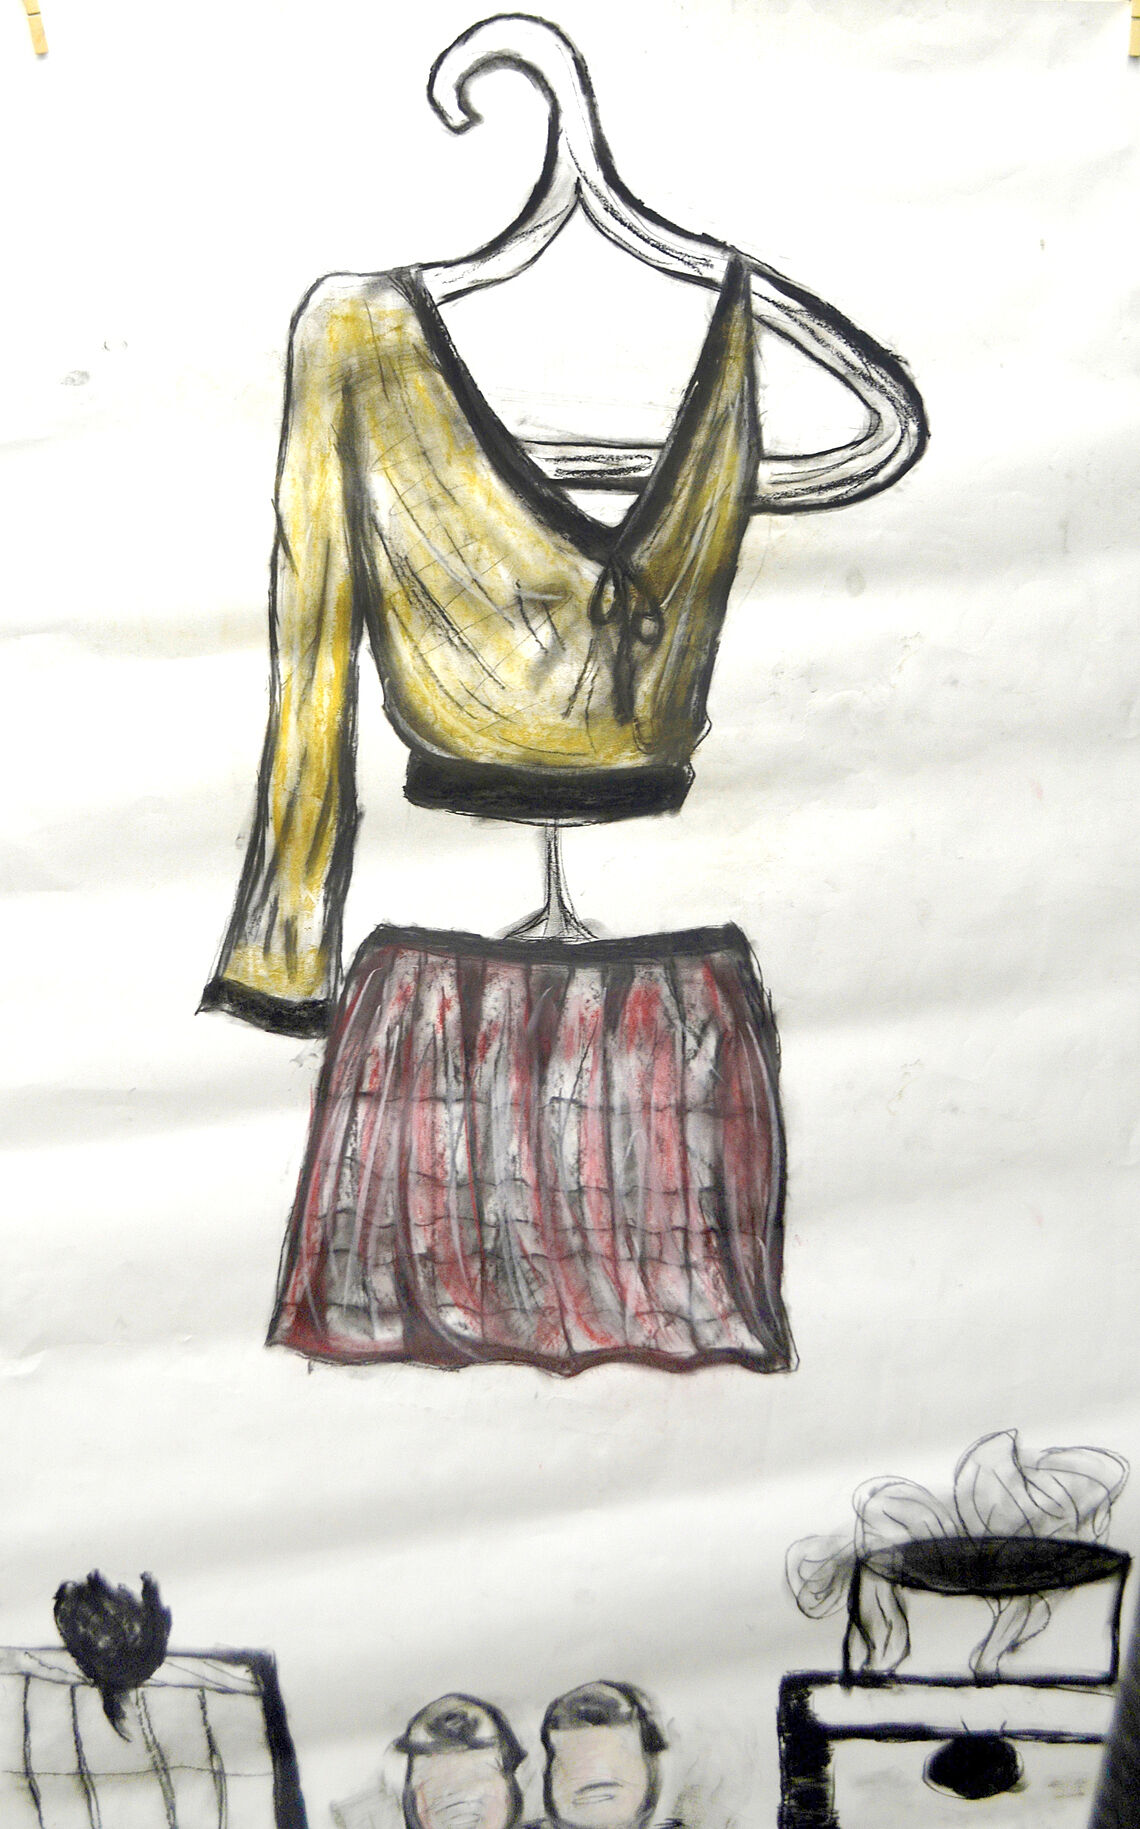 Drawing of an outfit with a gold top and red and black skirt.